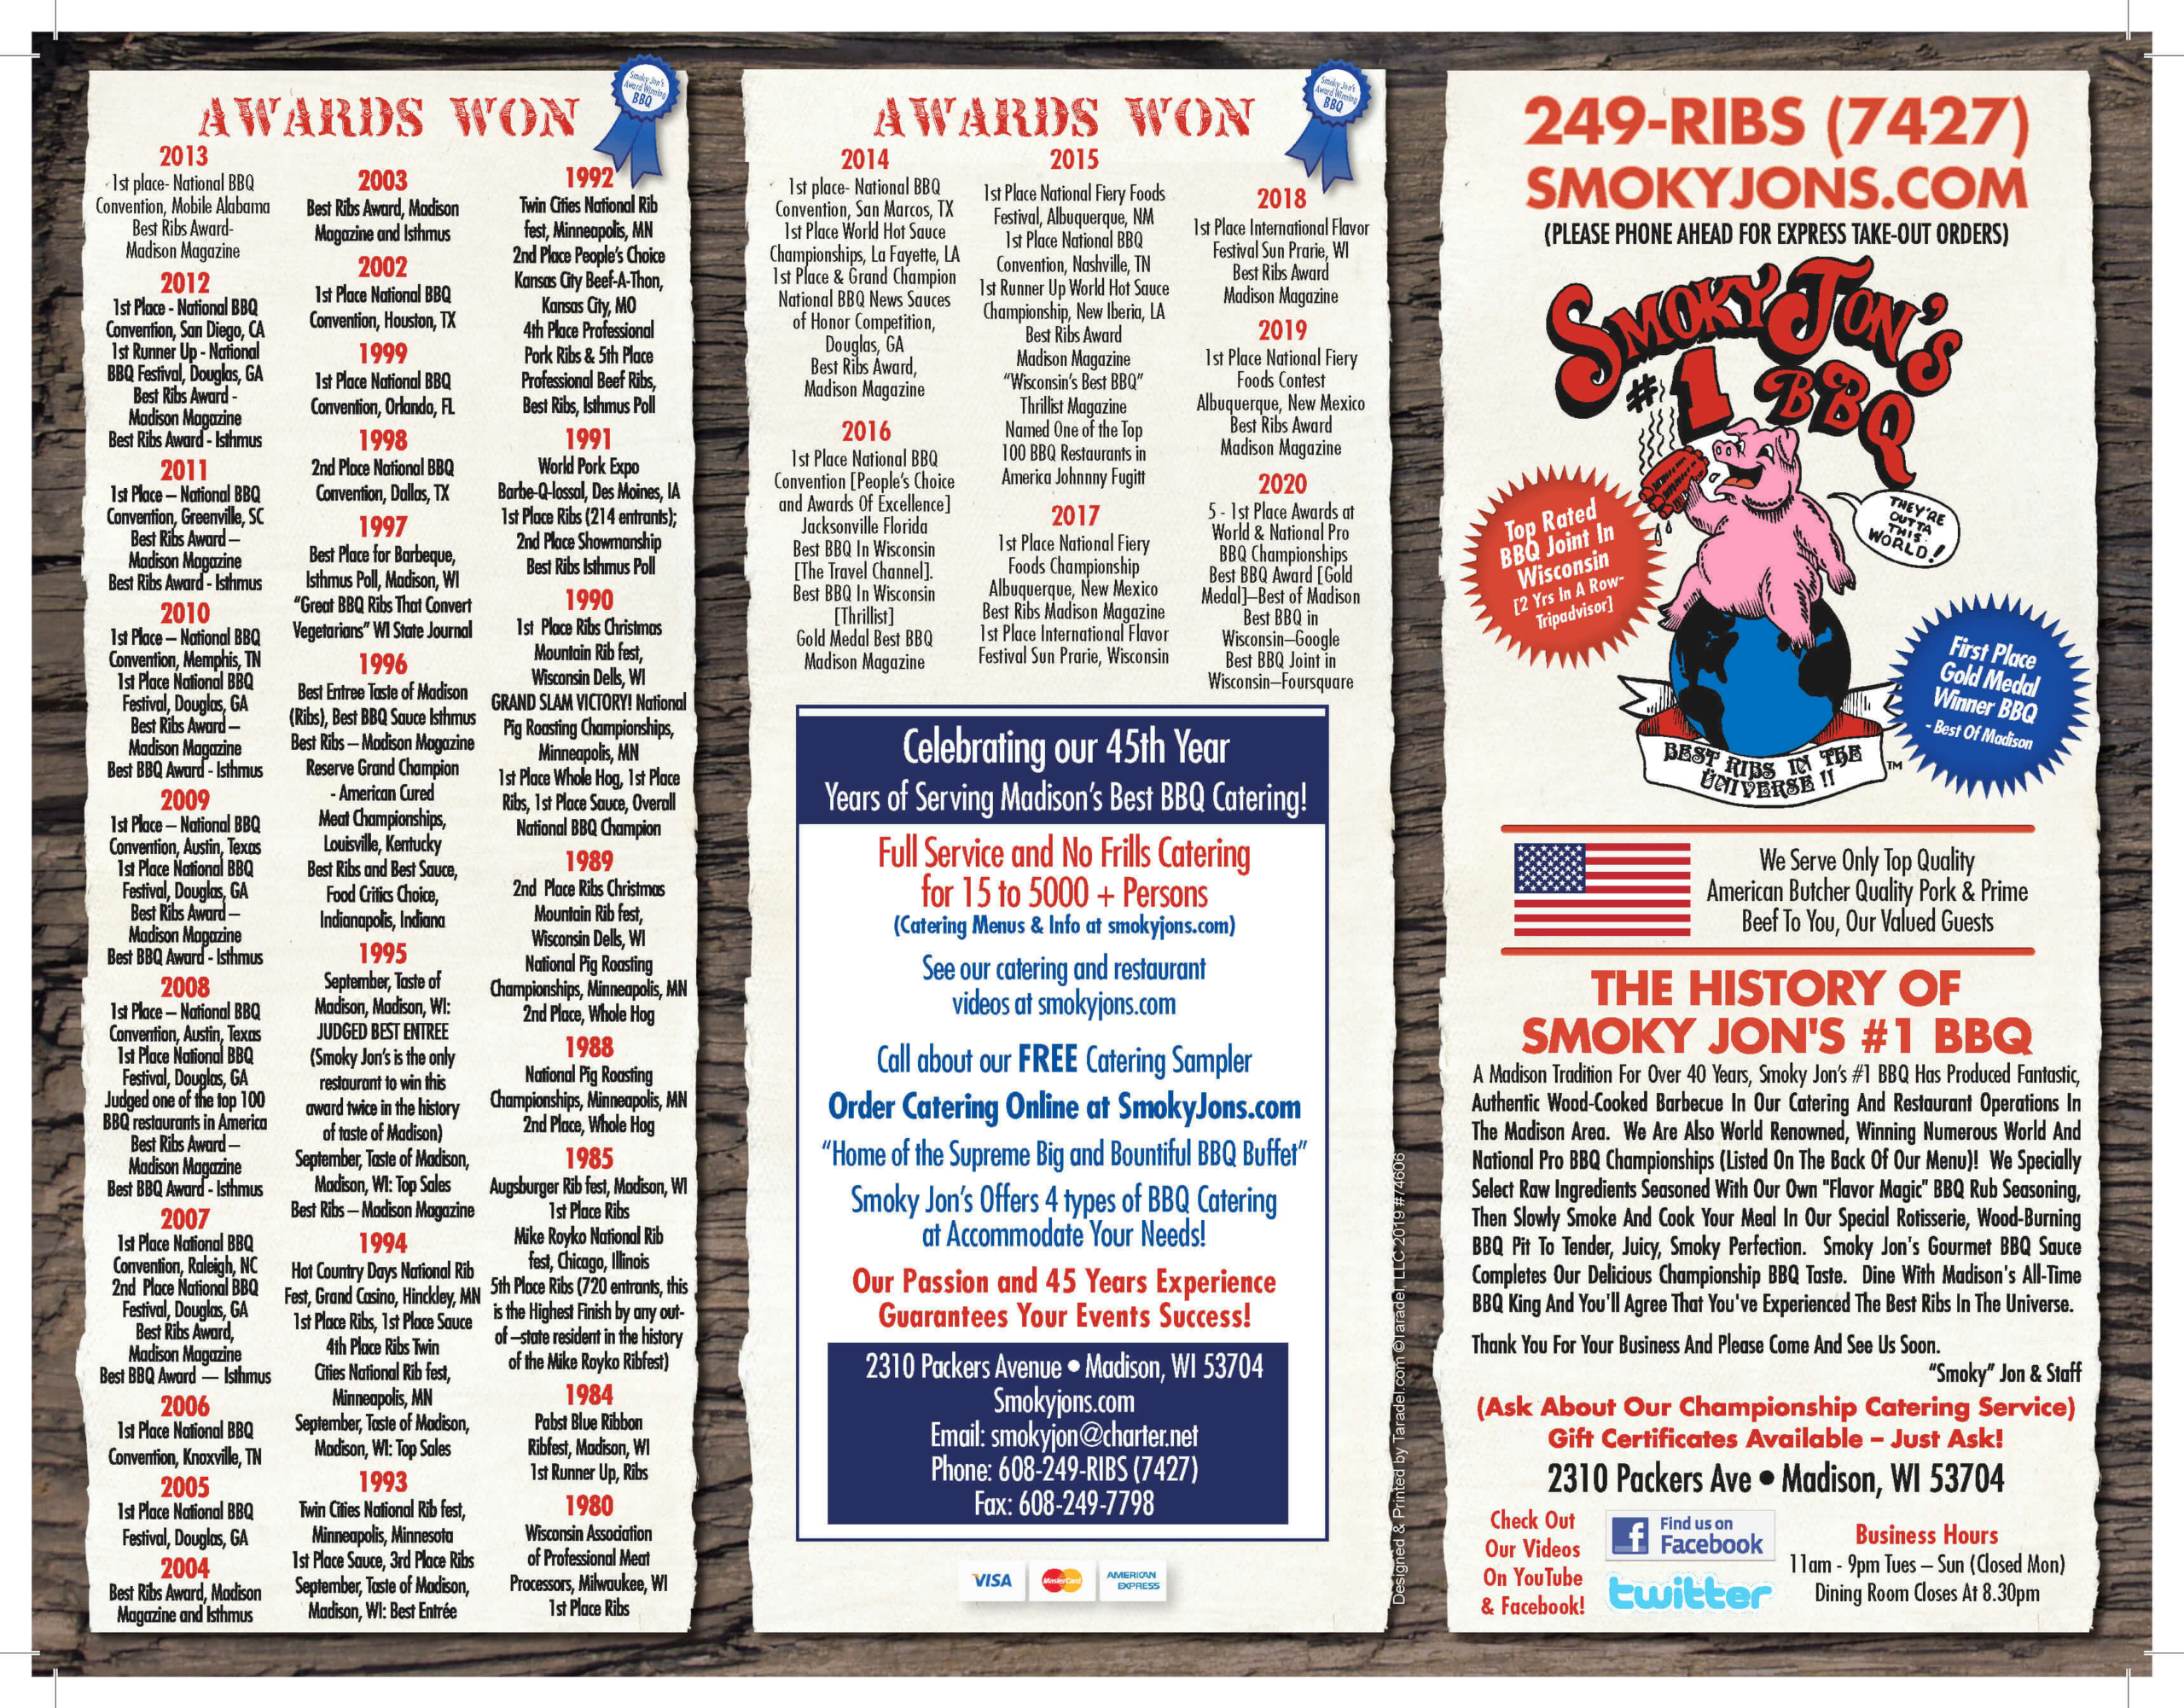 Smoky Jon's #1 BBQ Restaurant & Catering of Madison, WI – Call 608-249